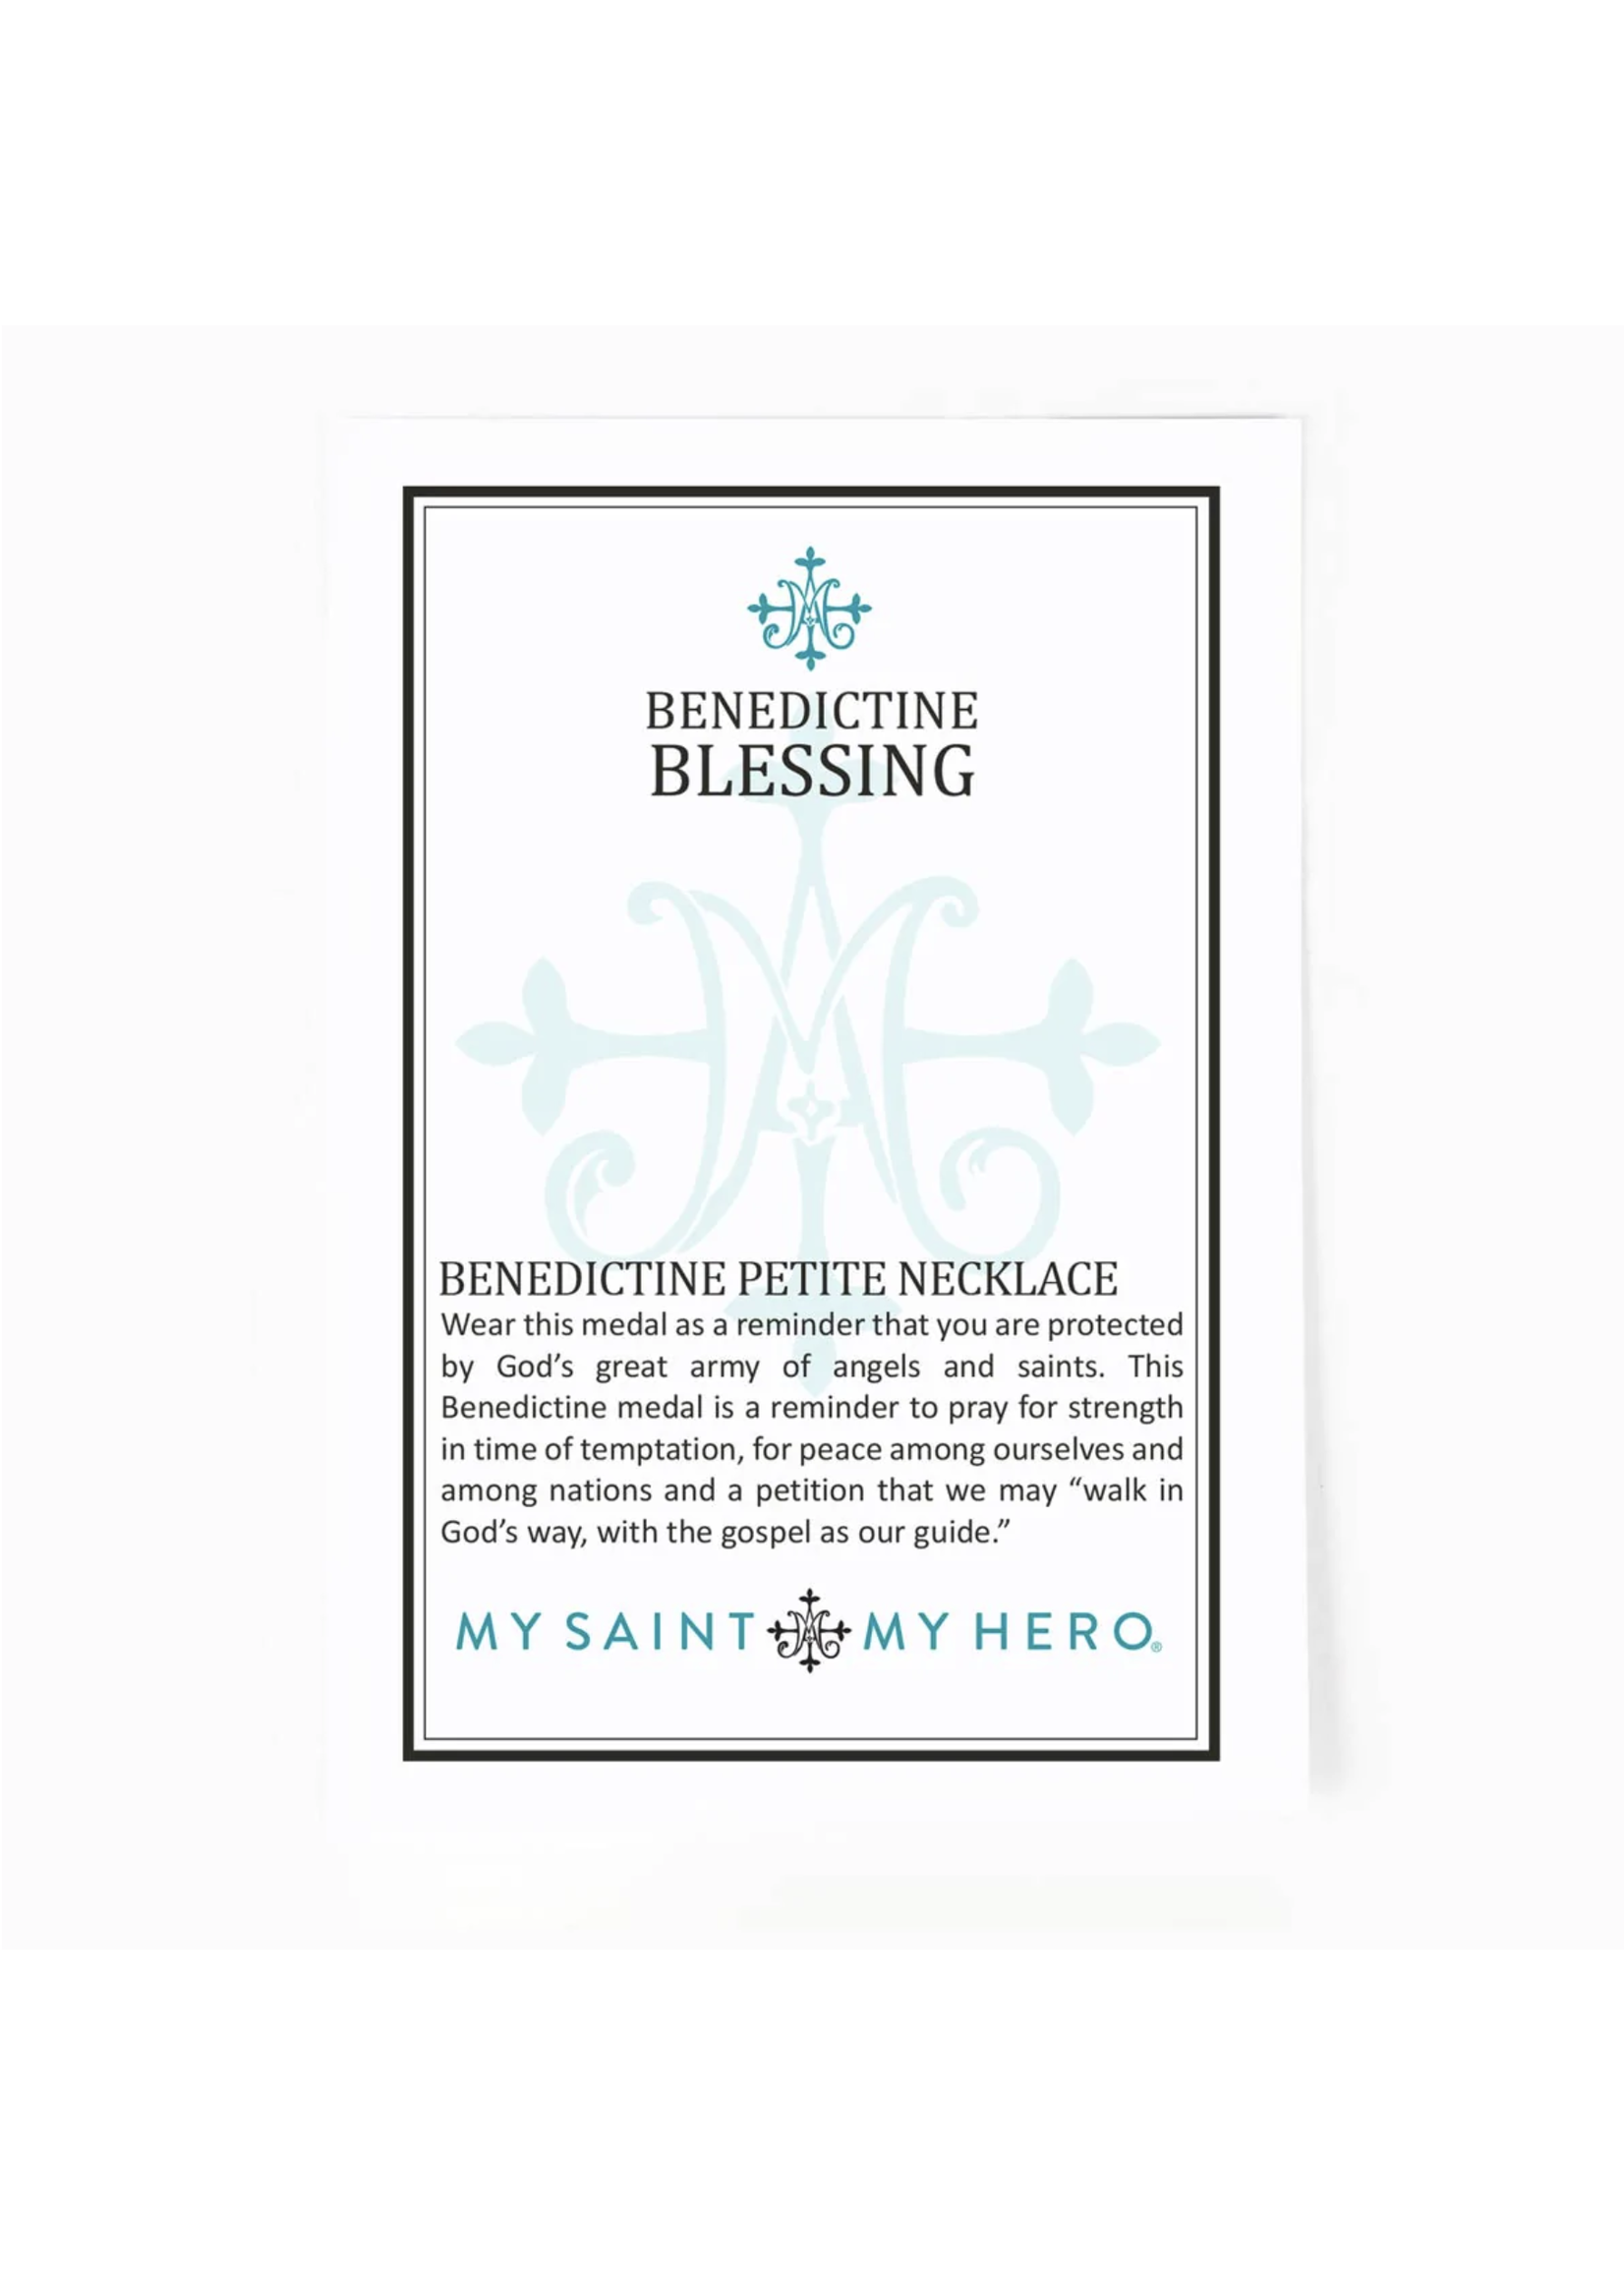 My Saint My Hero Benedictine Blessing Petite Necklace - Sterling Silver